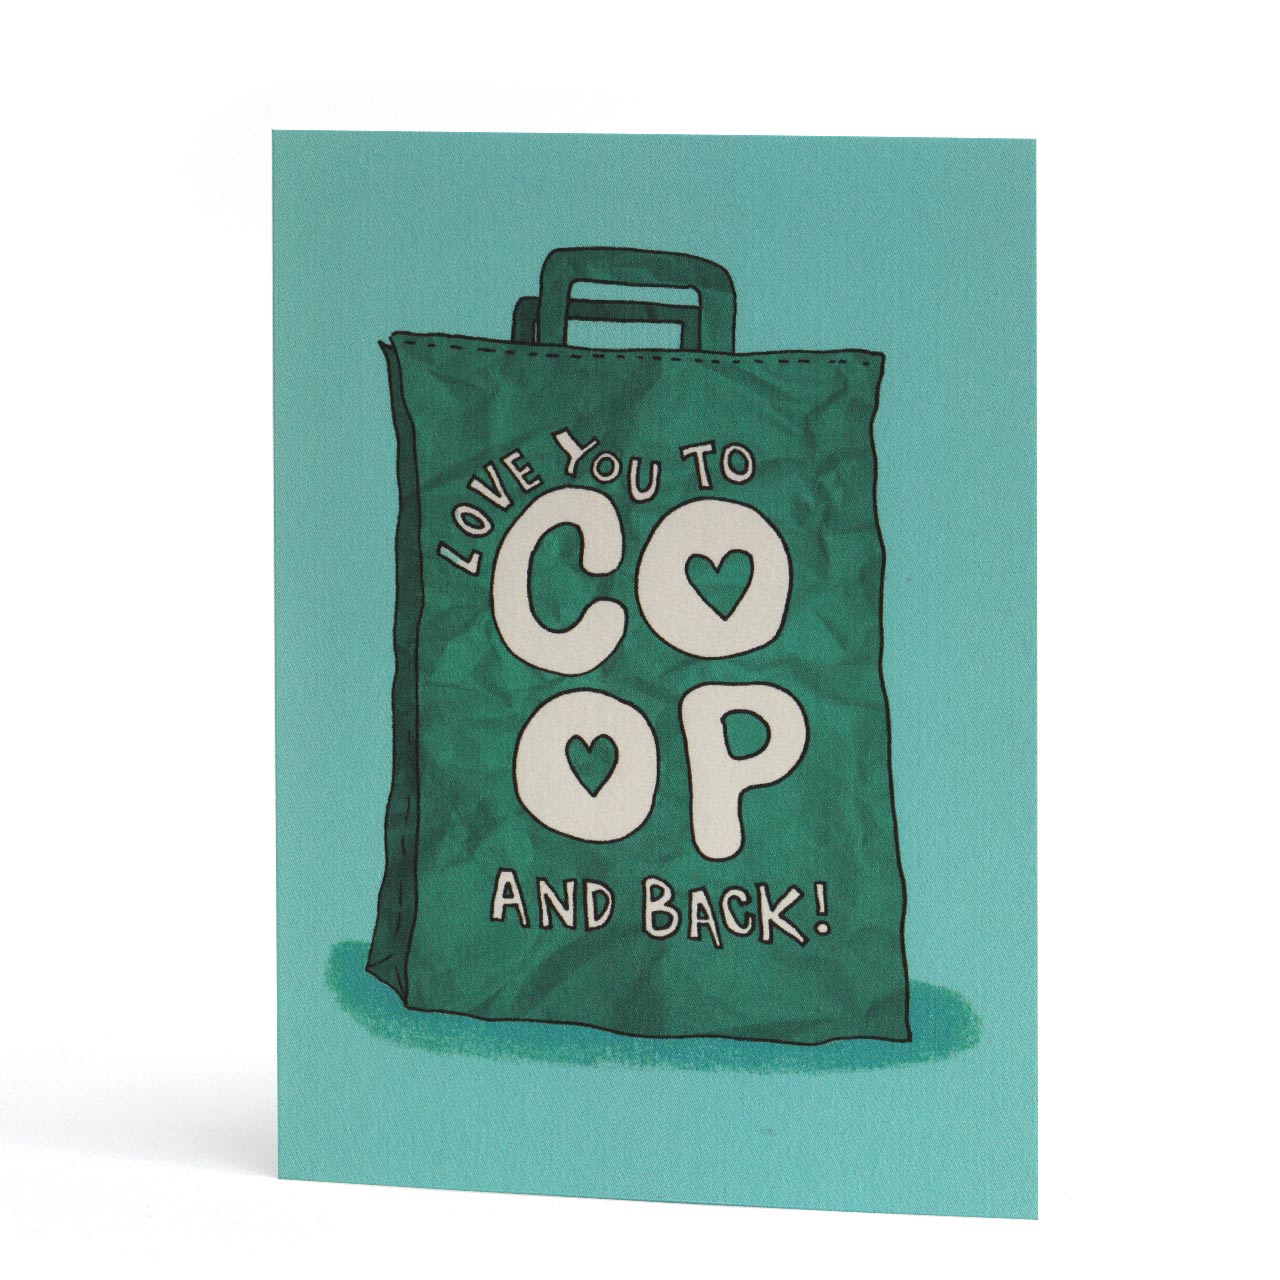 Love You to Co Op and Back Greeting Card